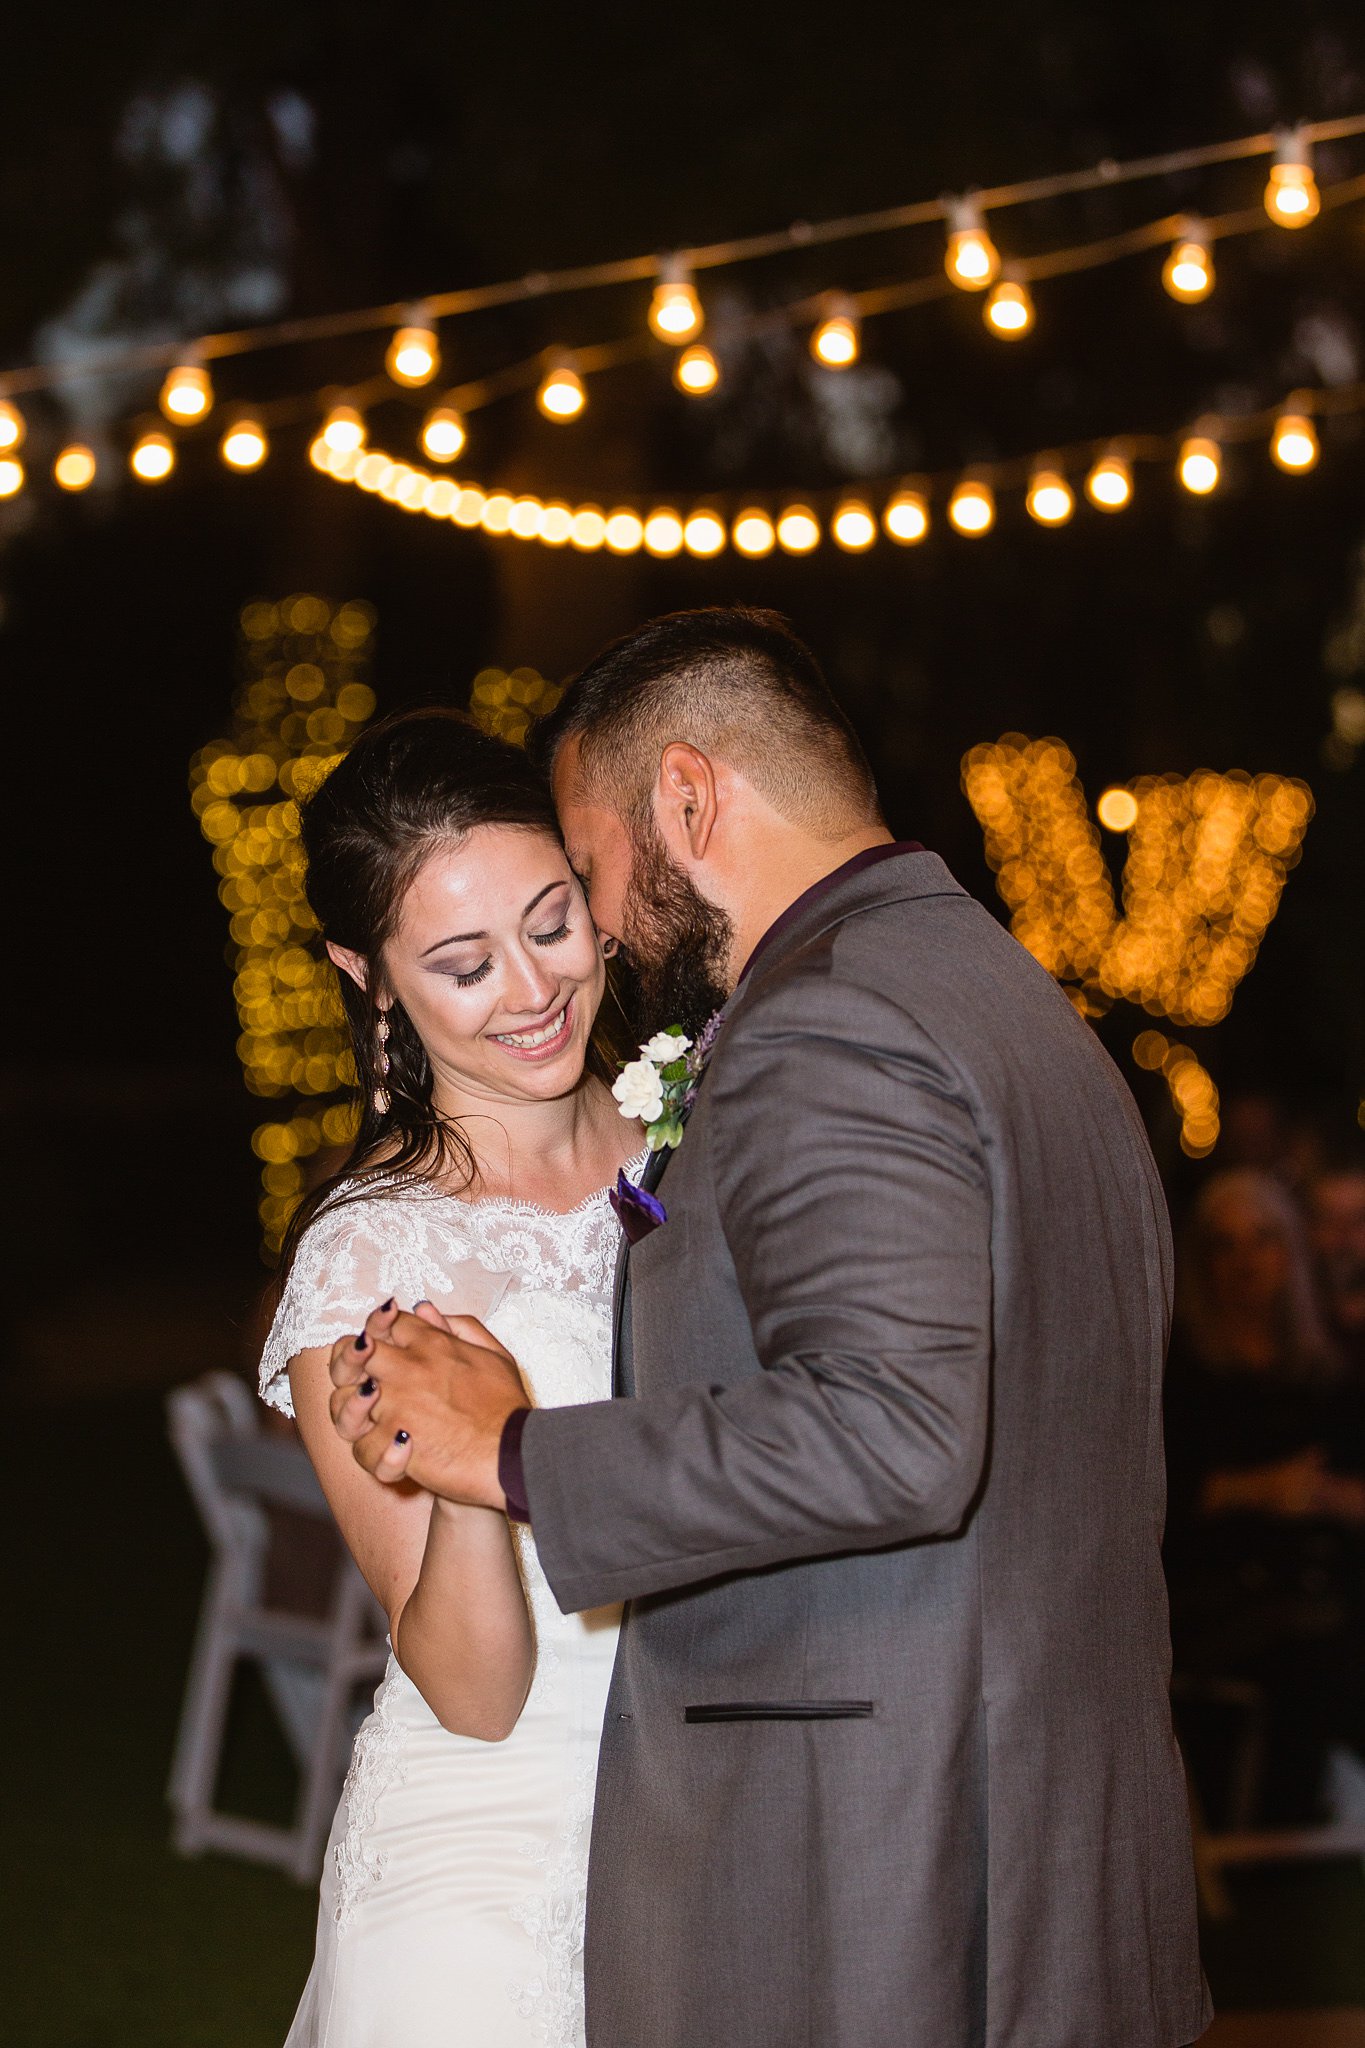 Bride and groom's first dance at their Schnepf Farms Farmhouse wedding reception by Arizona wedding photographer PMA Photography.